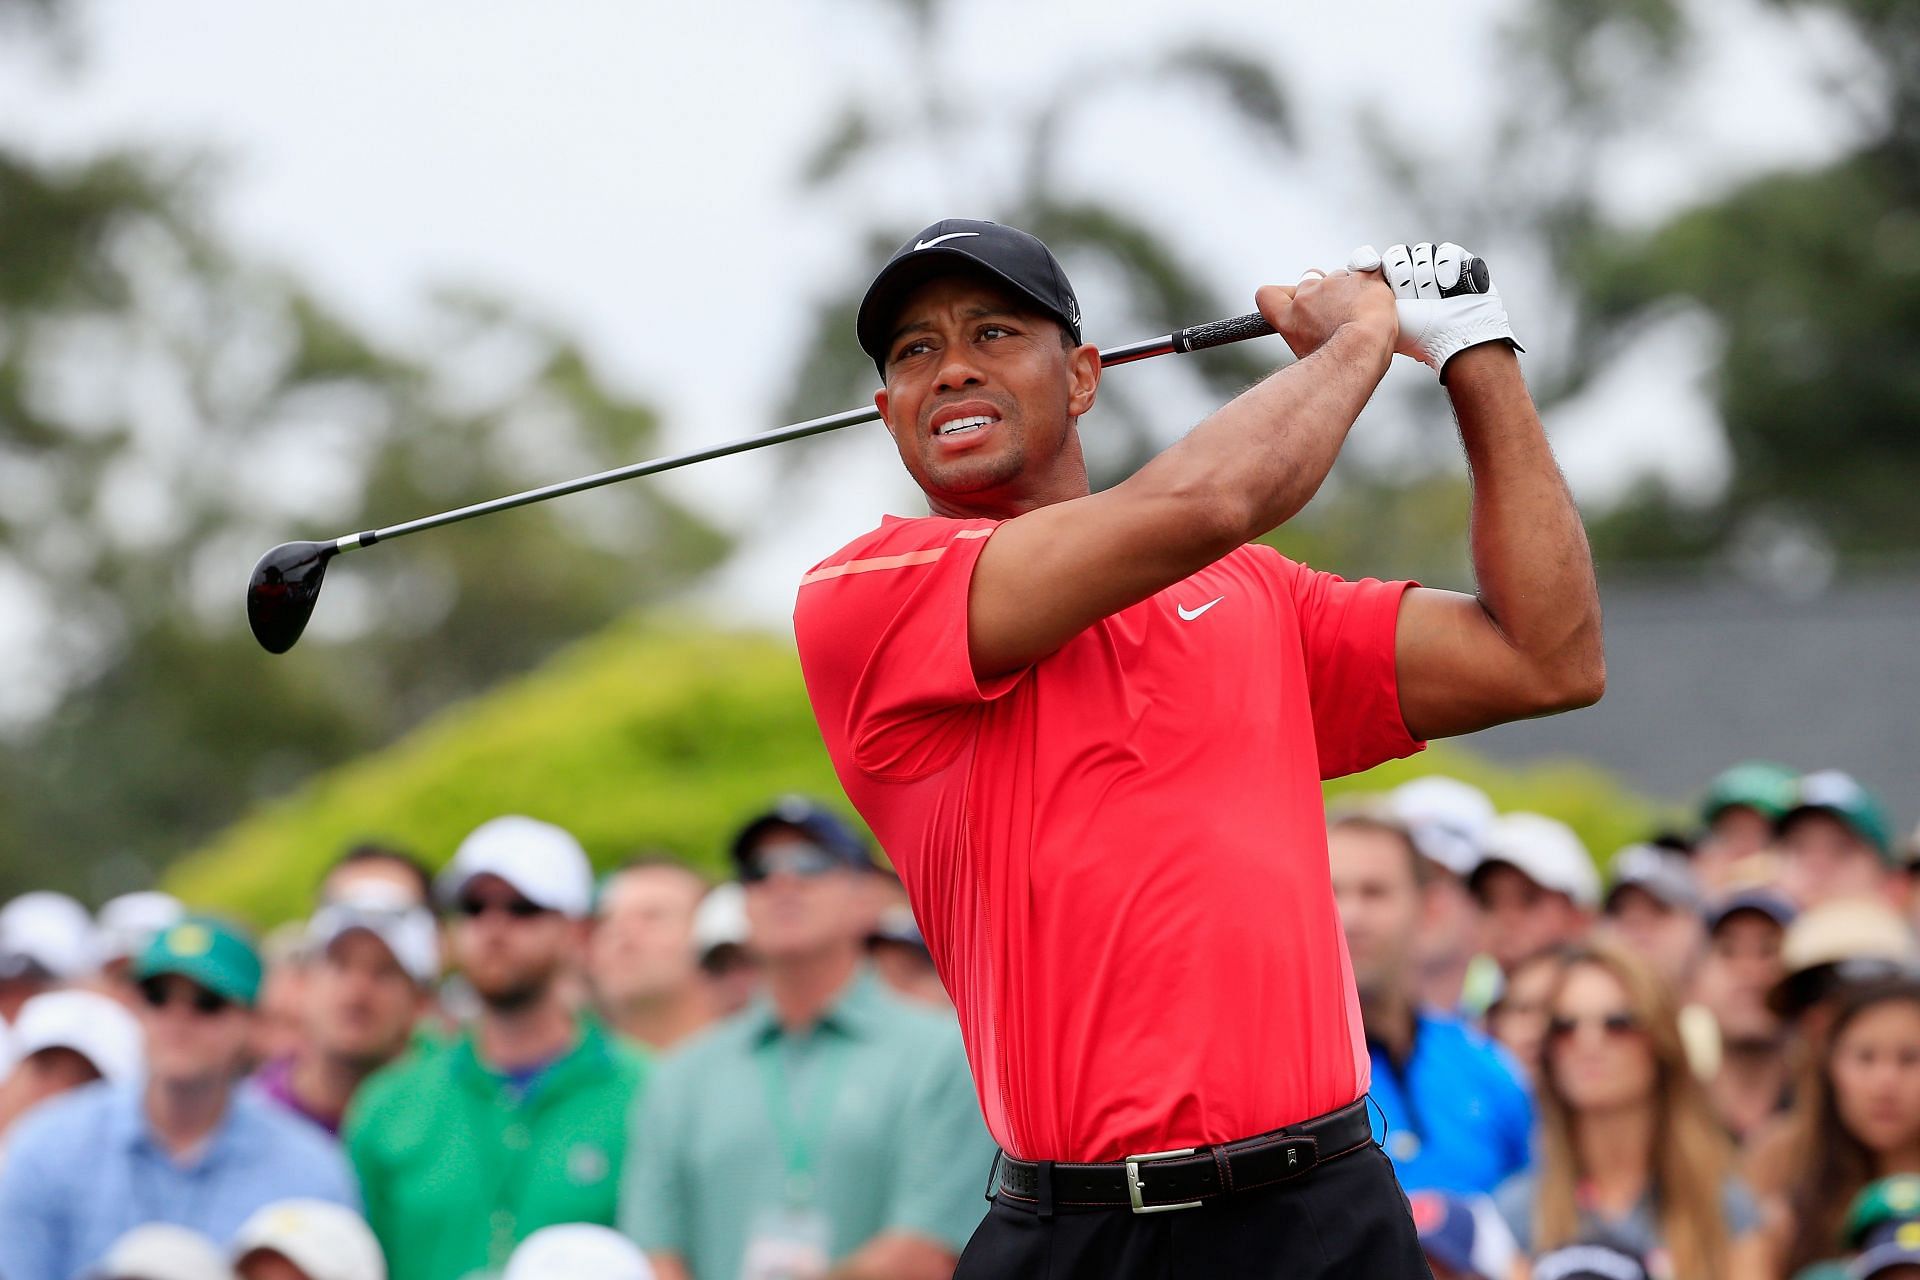 Tiger Woods leads the all-time money list in golf